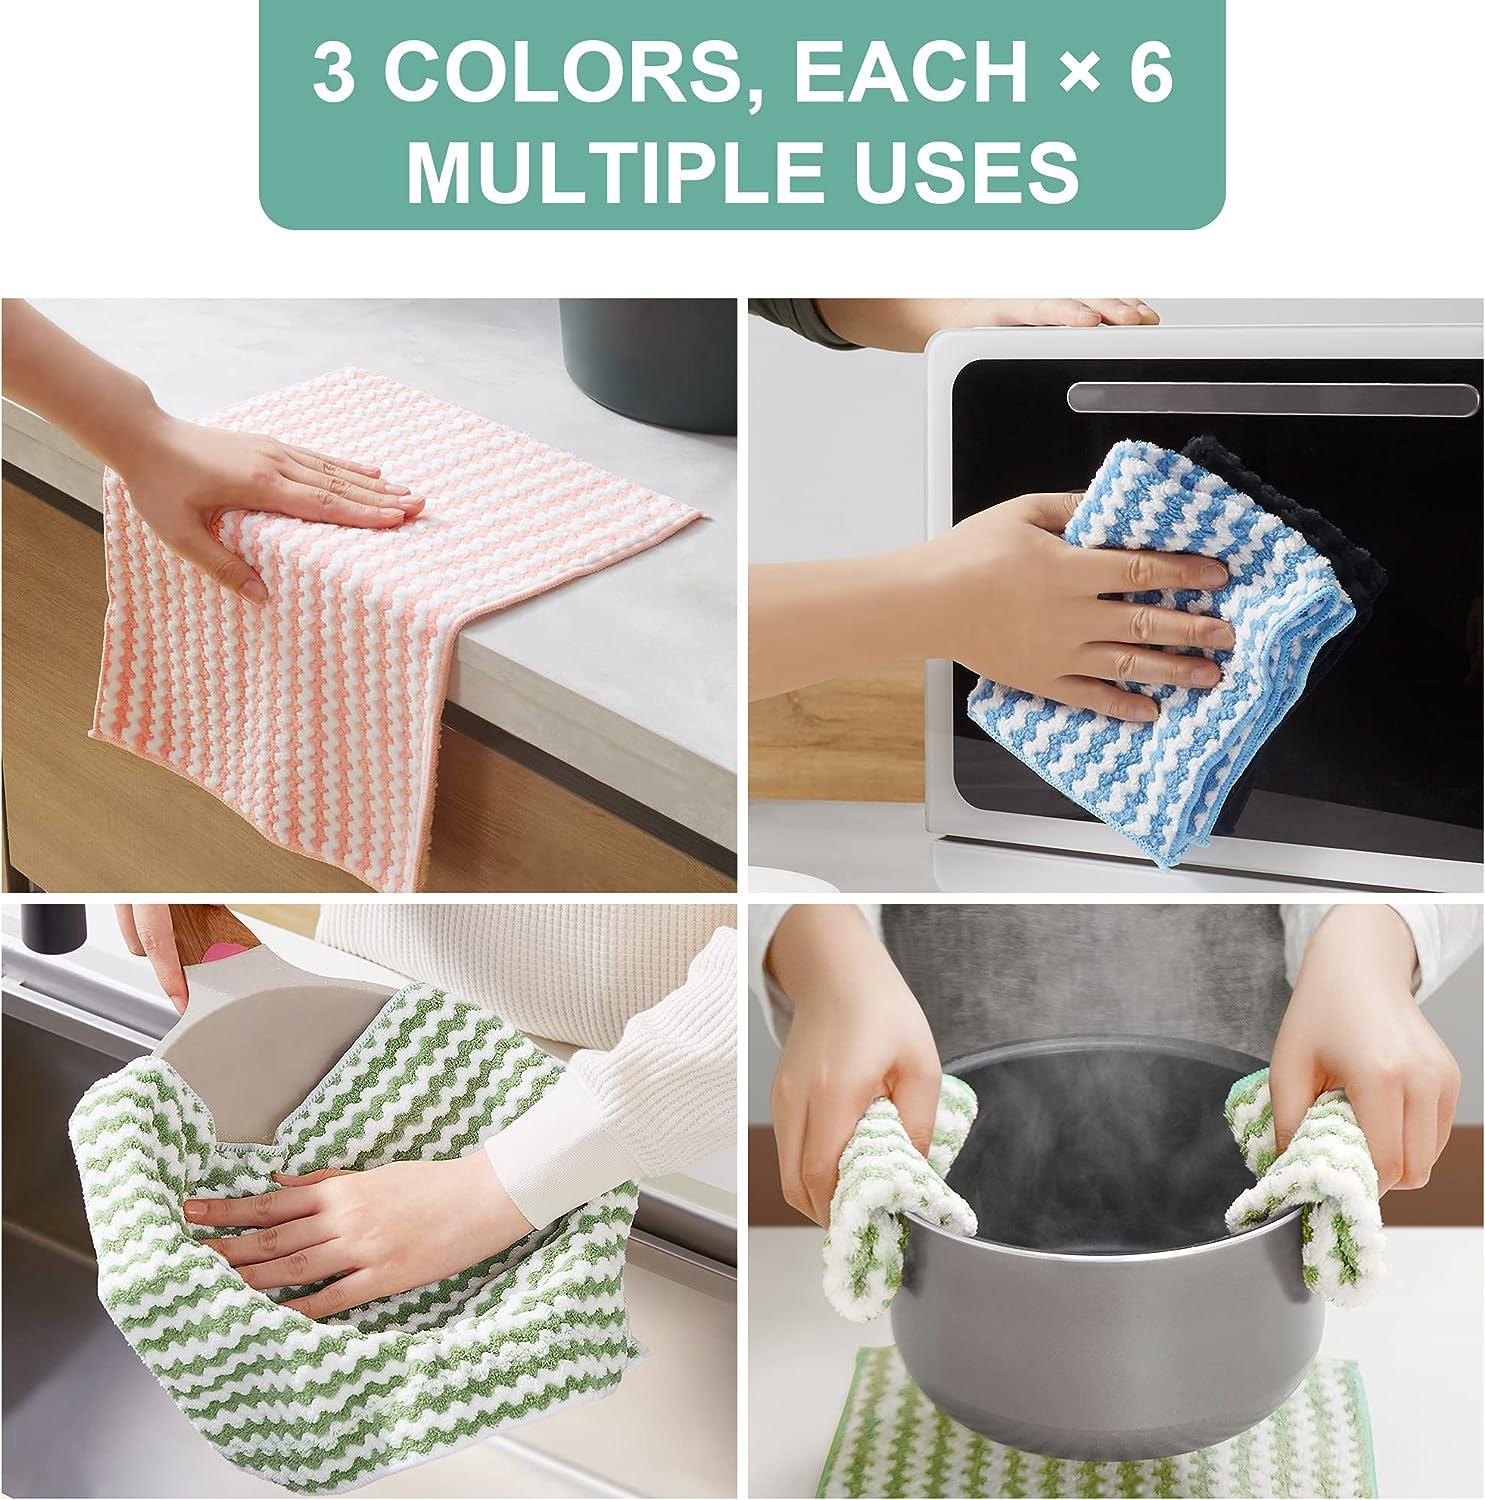 JOYMOOP Microfiber Cleaning Cloth, Kitchen Towels for Dish Drying Washing,  Absorbent Streak Free Lint Free Rags for Cleaning, Reusable and Washable